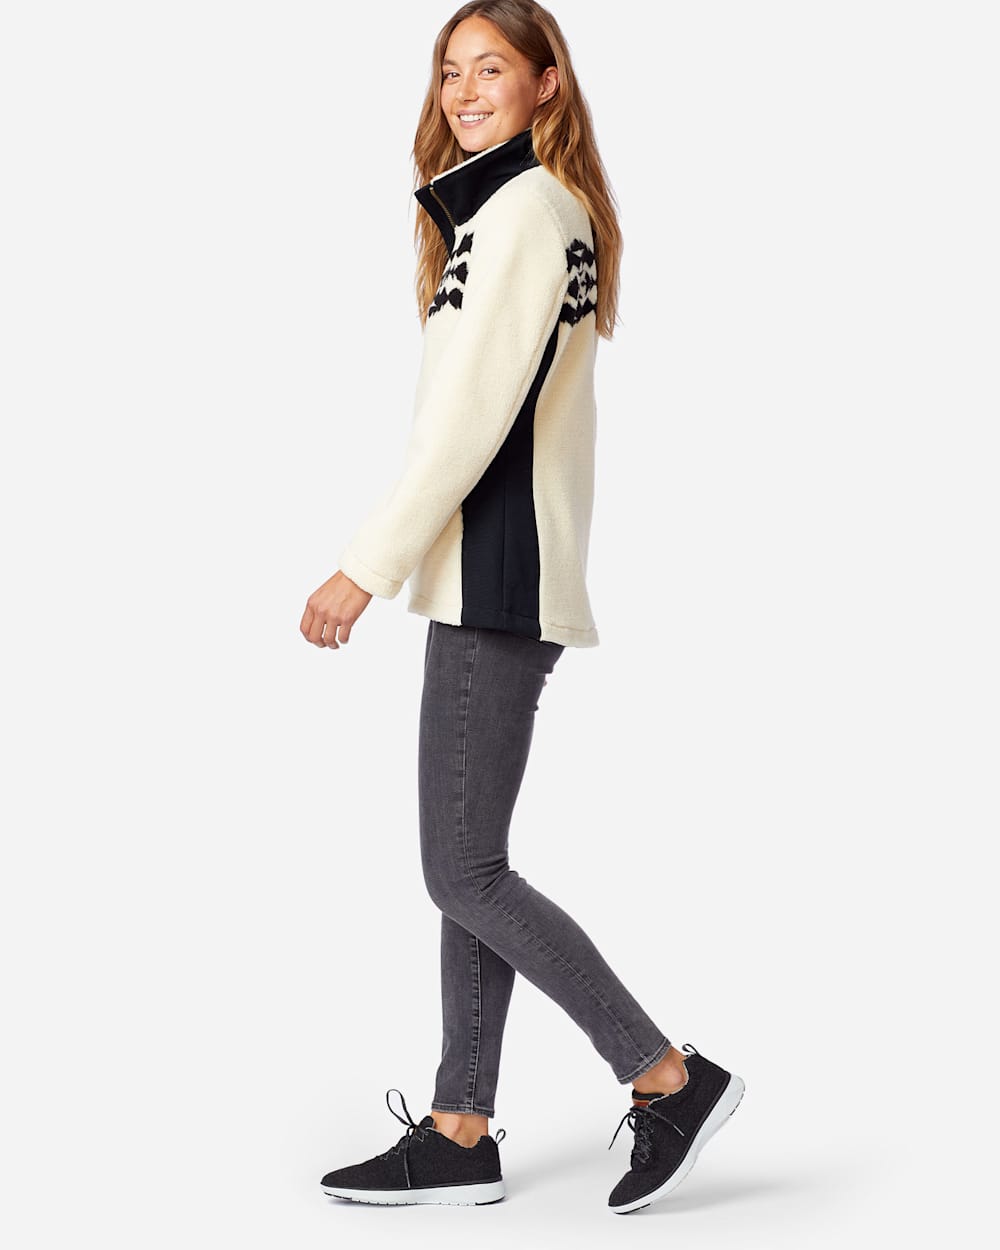 ALTERNATE VIEW OF WOMEN'S BROOKE SONORA SHERPA JACKET IN IVORY SONORA image number 2